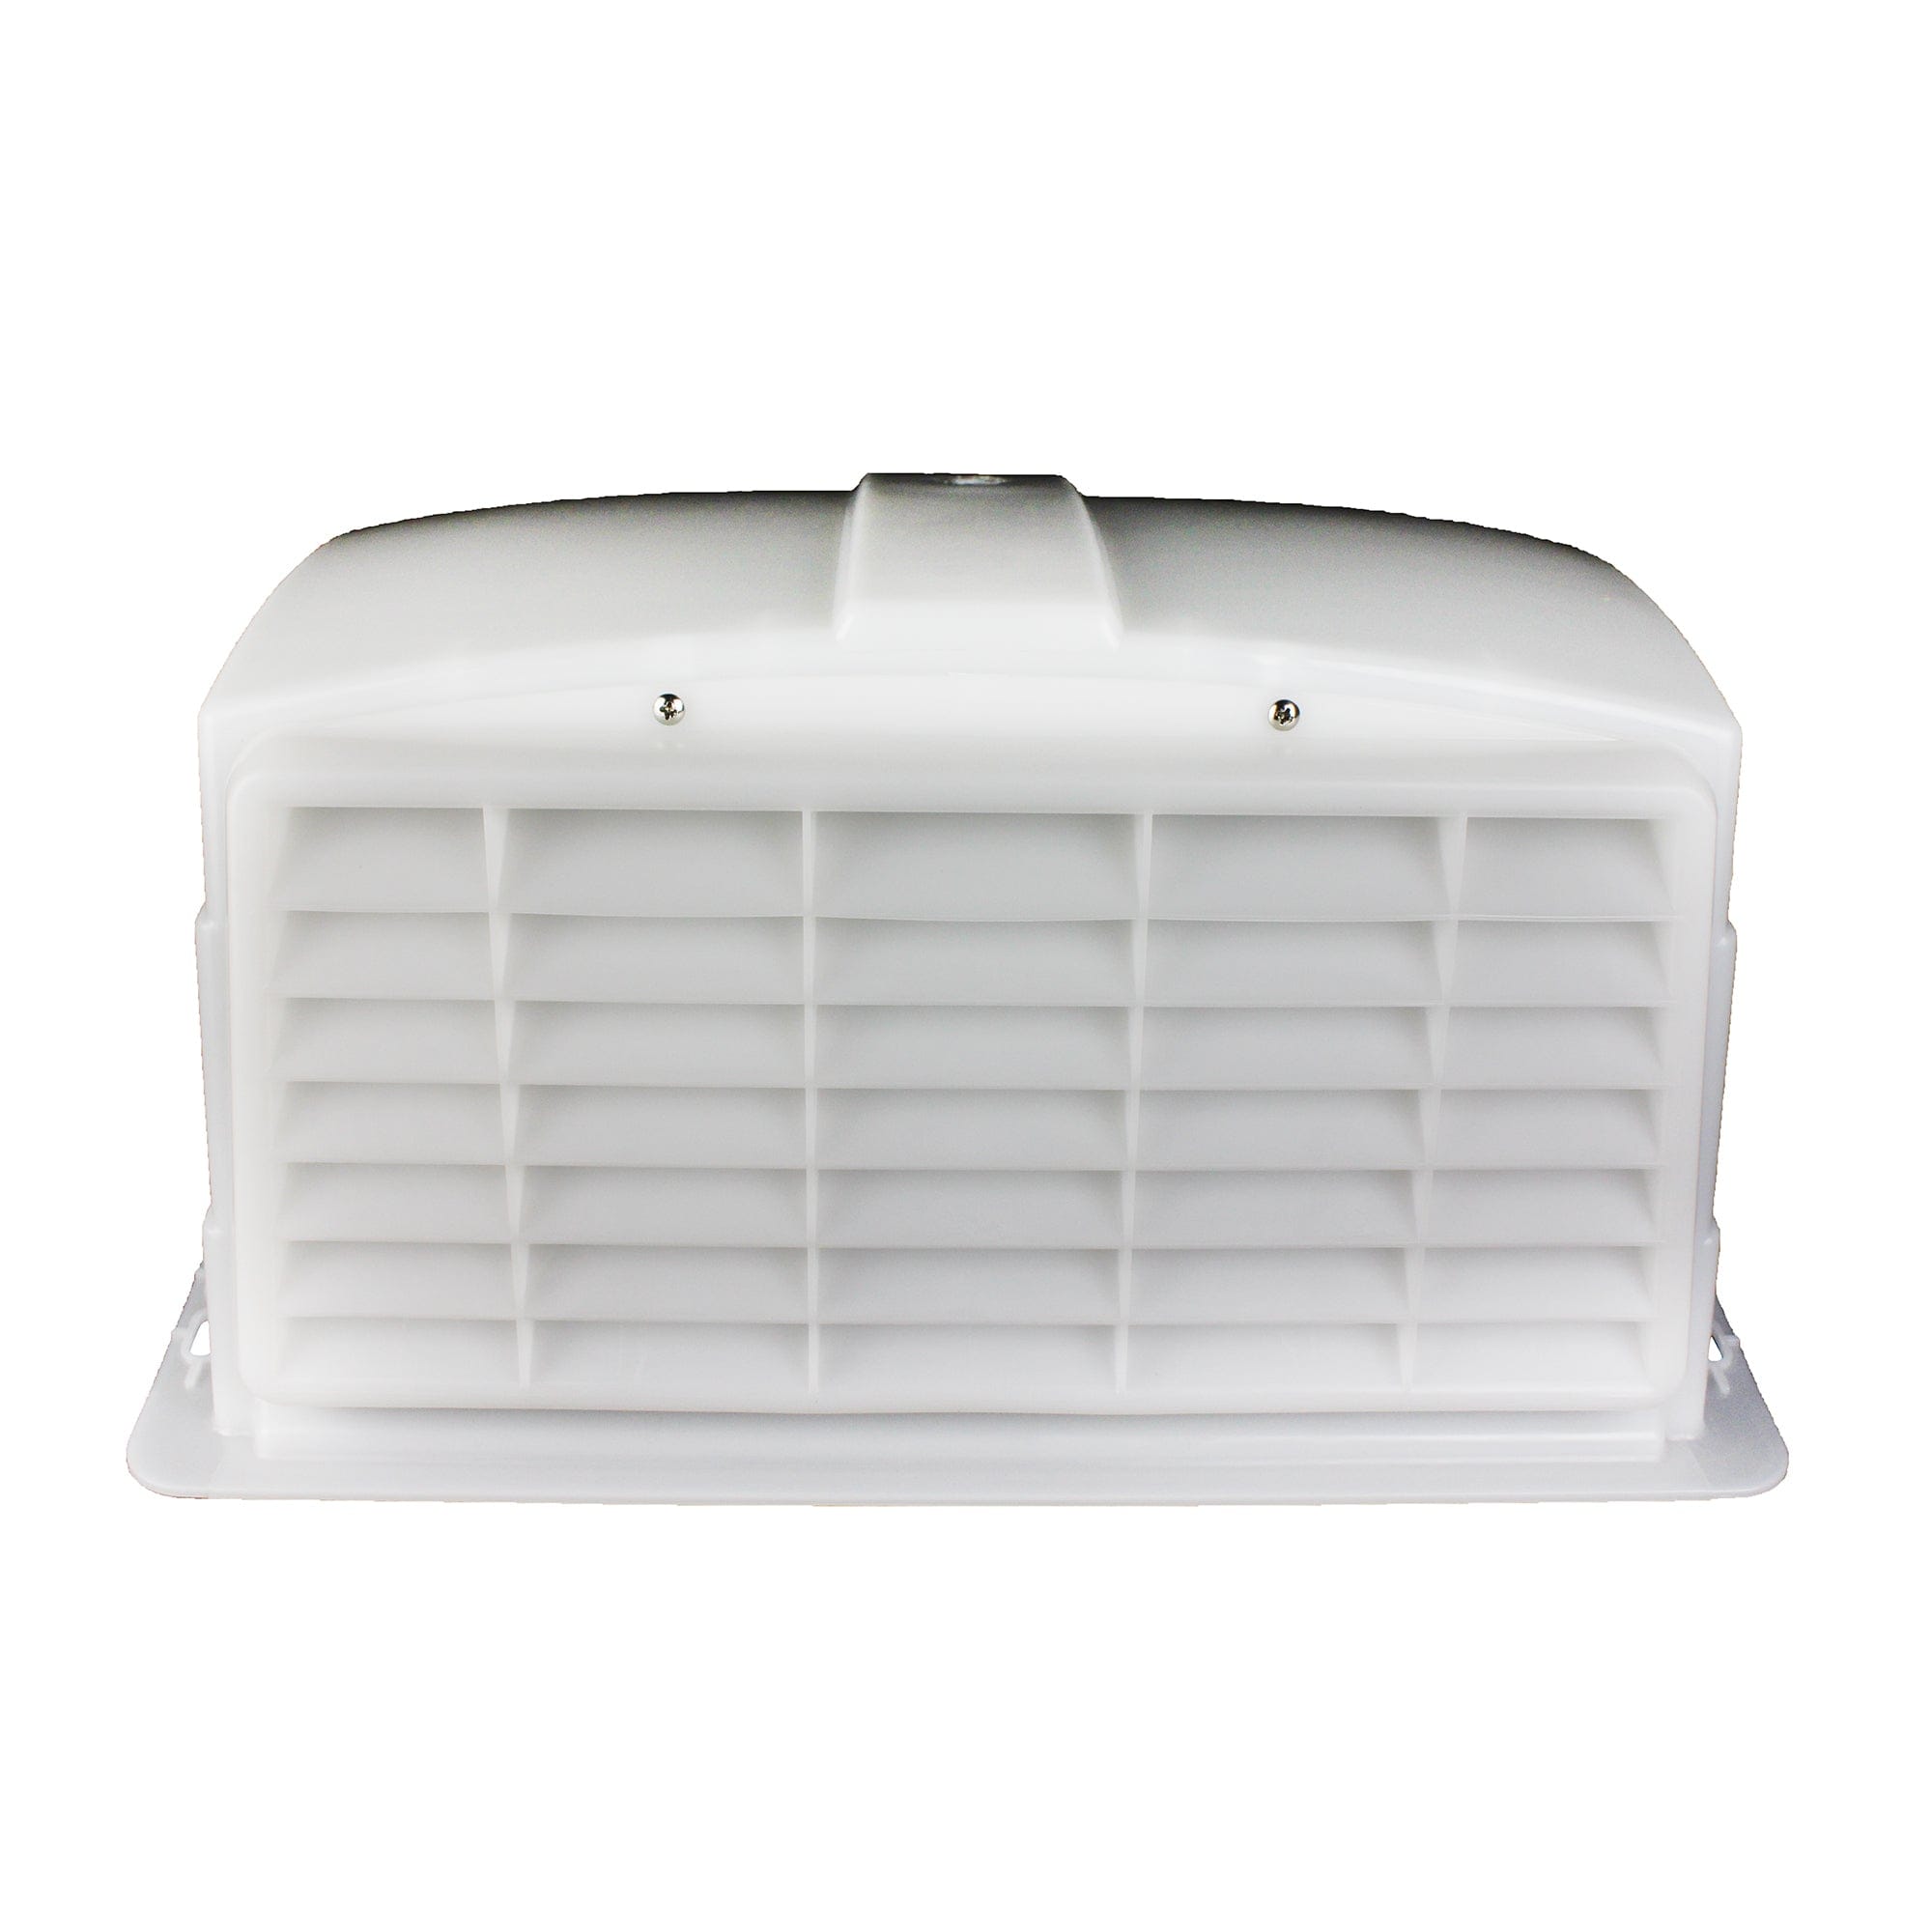 Camco 40433 RV Roof Vent Cover, White